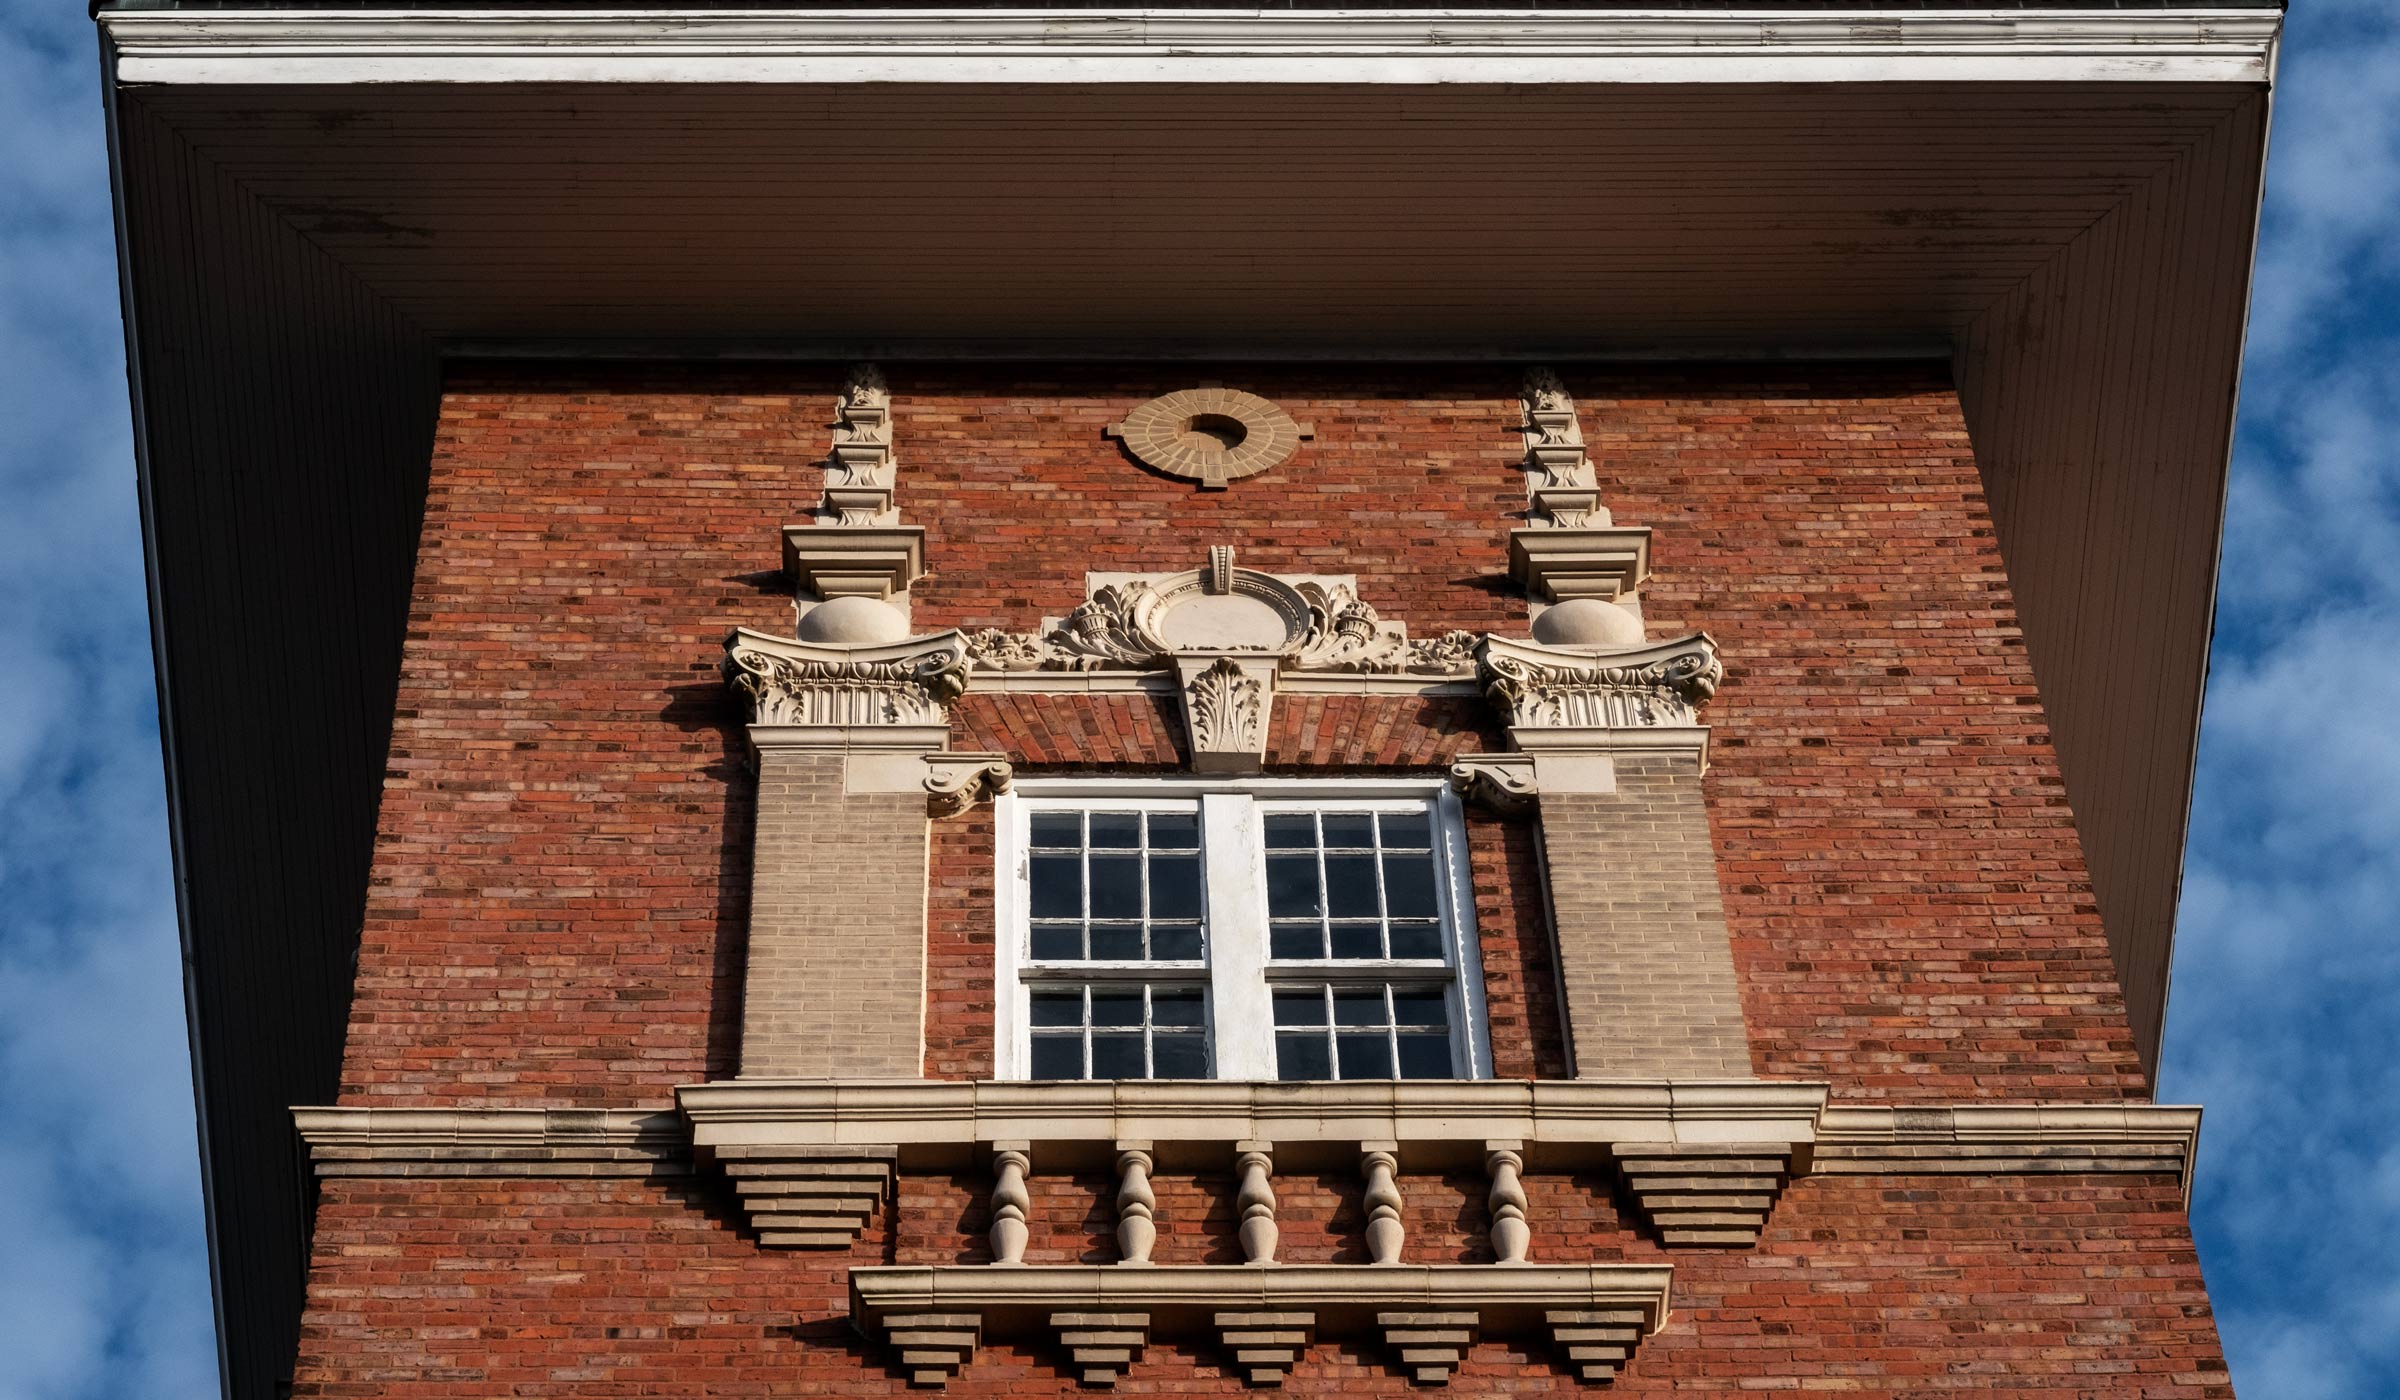 The tops of each of the two red brick towers of the historic Industrial Education building are adorned with detailed craftsmanship. The photo focuses on the top of one tower, with lightly clouded blue sky in the background.